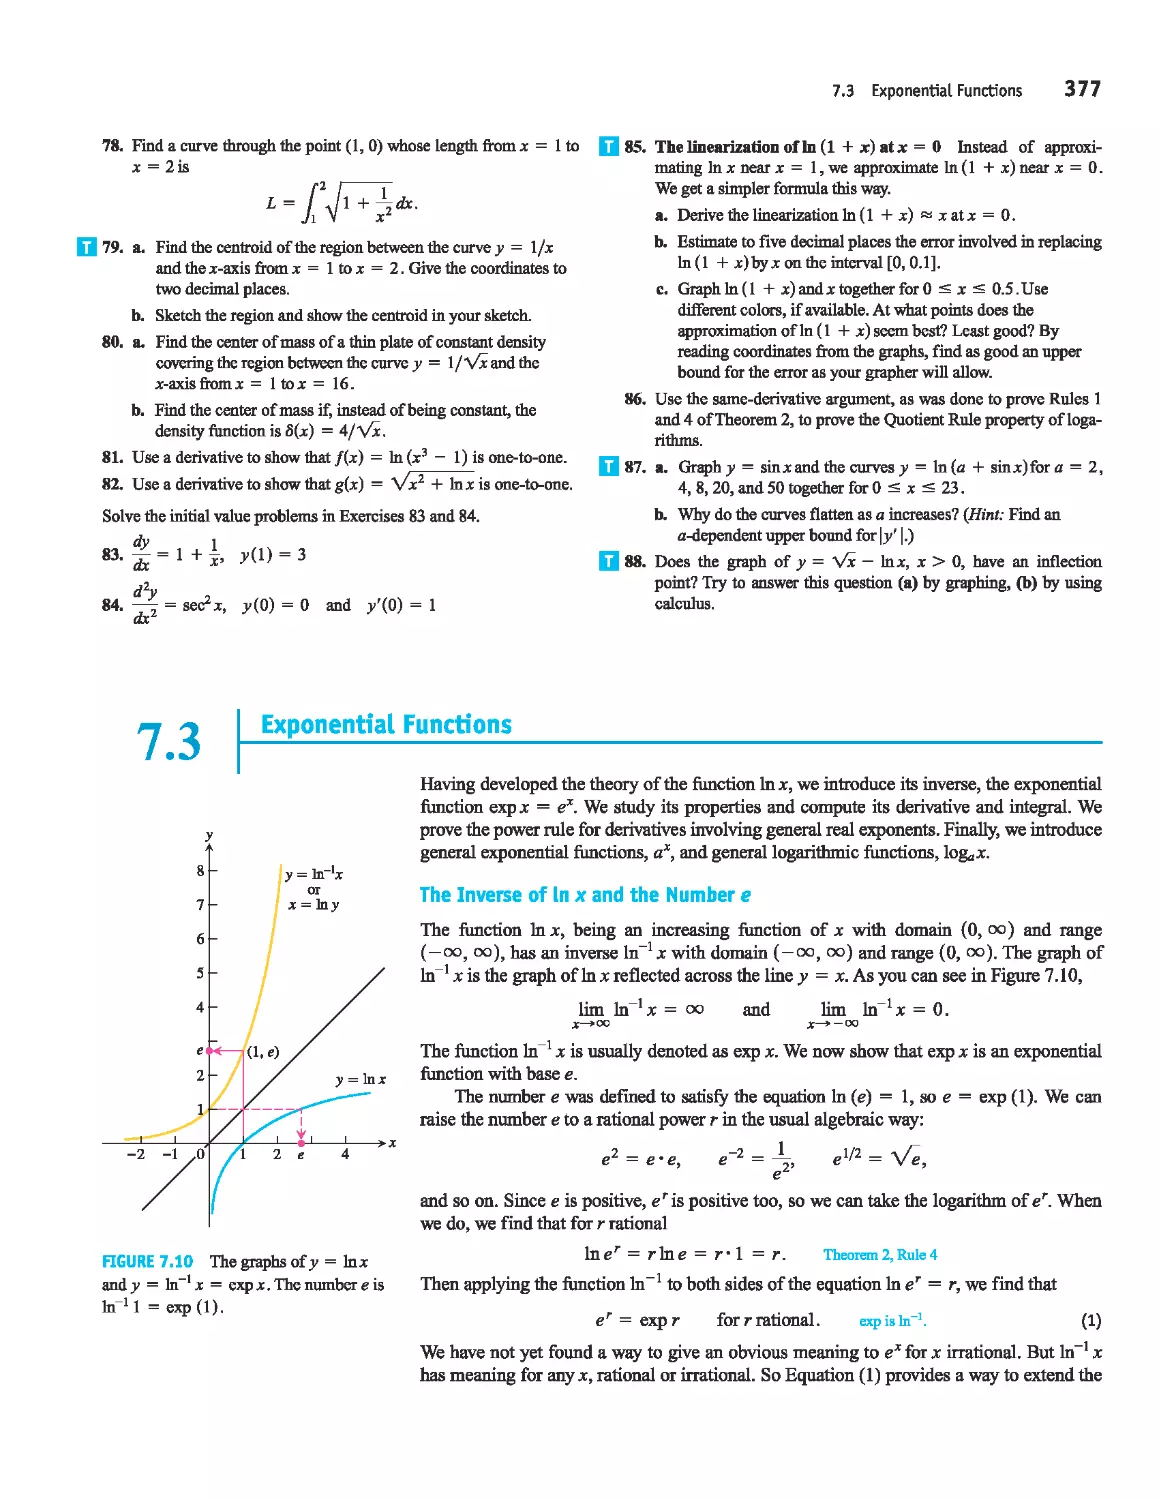 7.3 - Exponential Functions